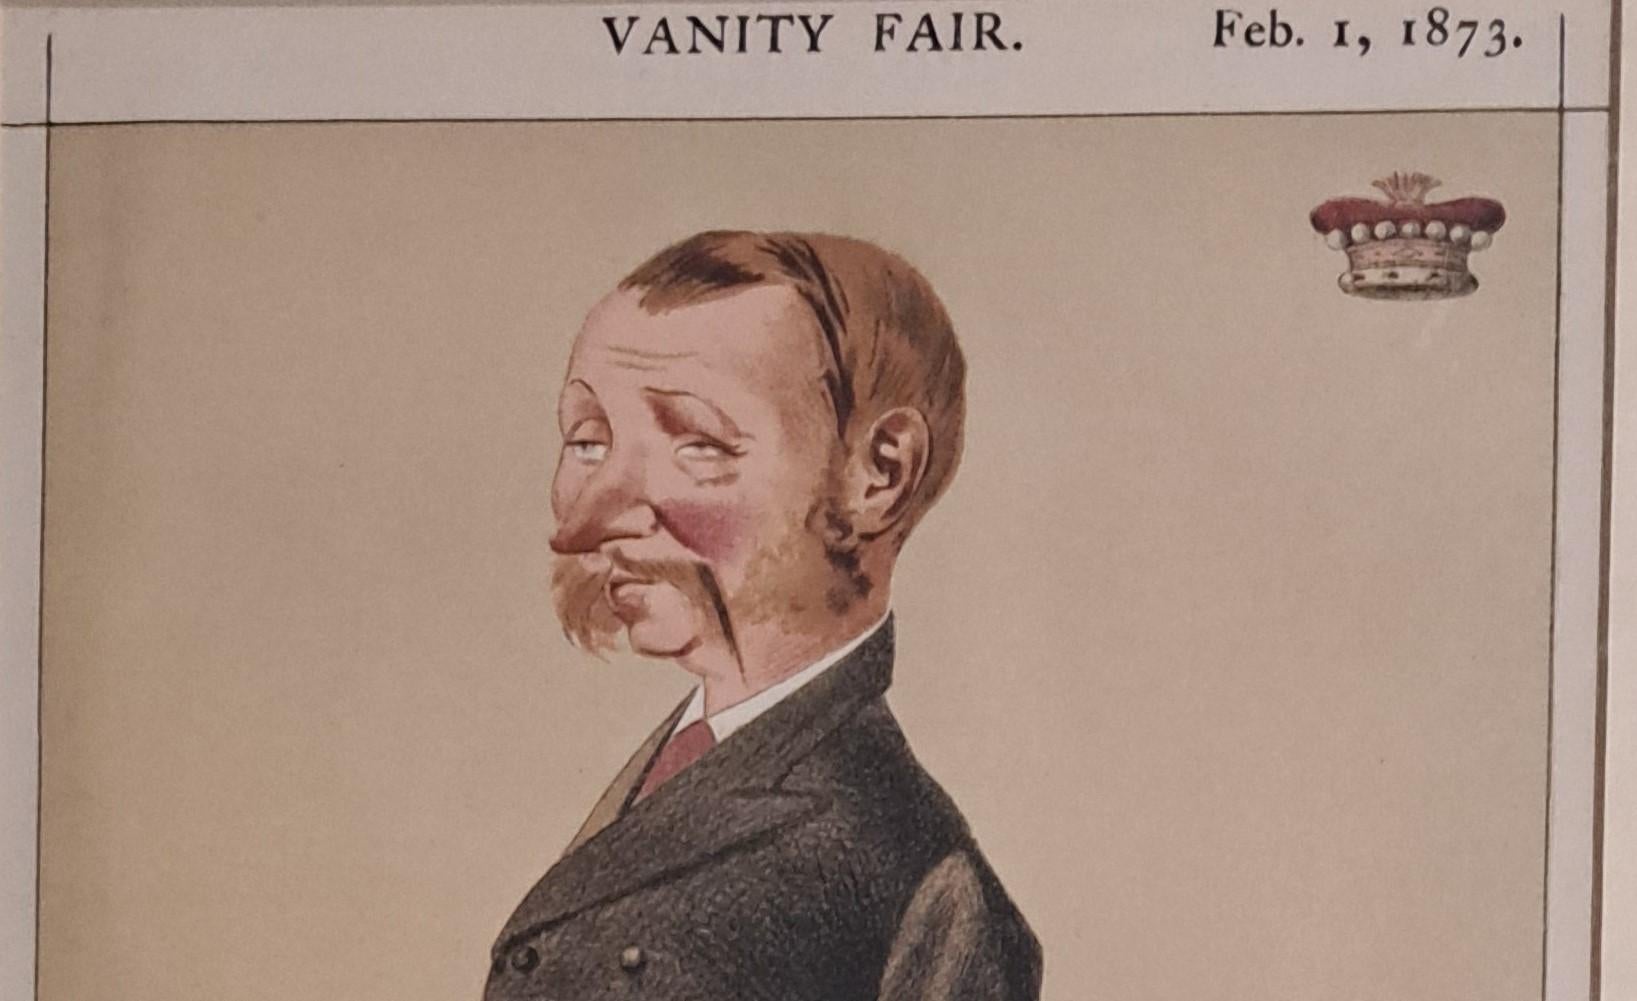 Vanity Fair Print, Statesman no 138 the Earl of Galloway
mounted size 49 x 34 cm in overall good condition unframed but comes with mount and description of sitter
 see below for details

I have a selection of vanity fair prints for sale acquired